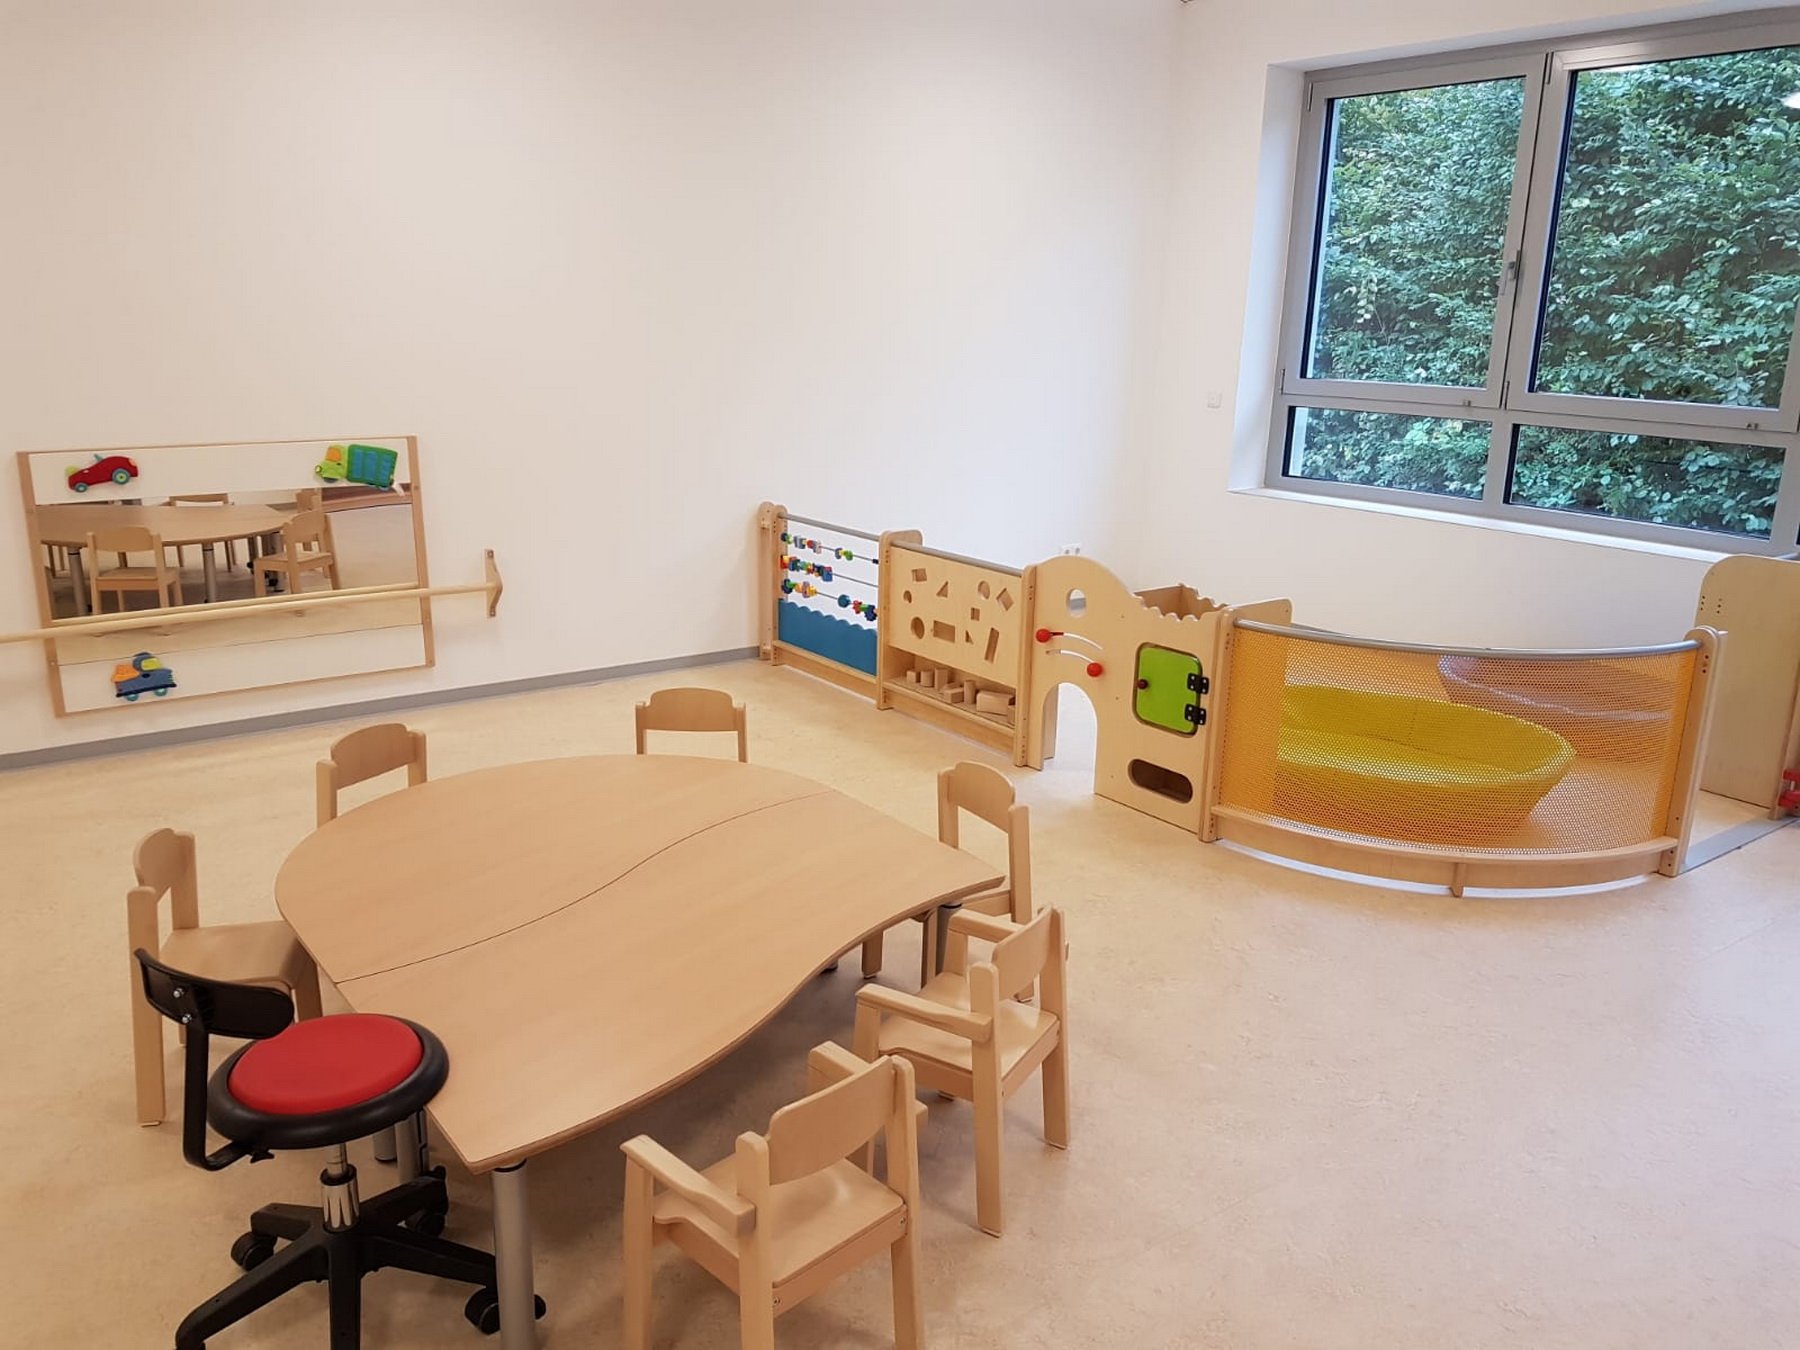 This photo shows the inside of nursery Ballern where you can find a round table and small chairs for the childen.